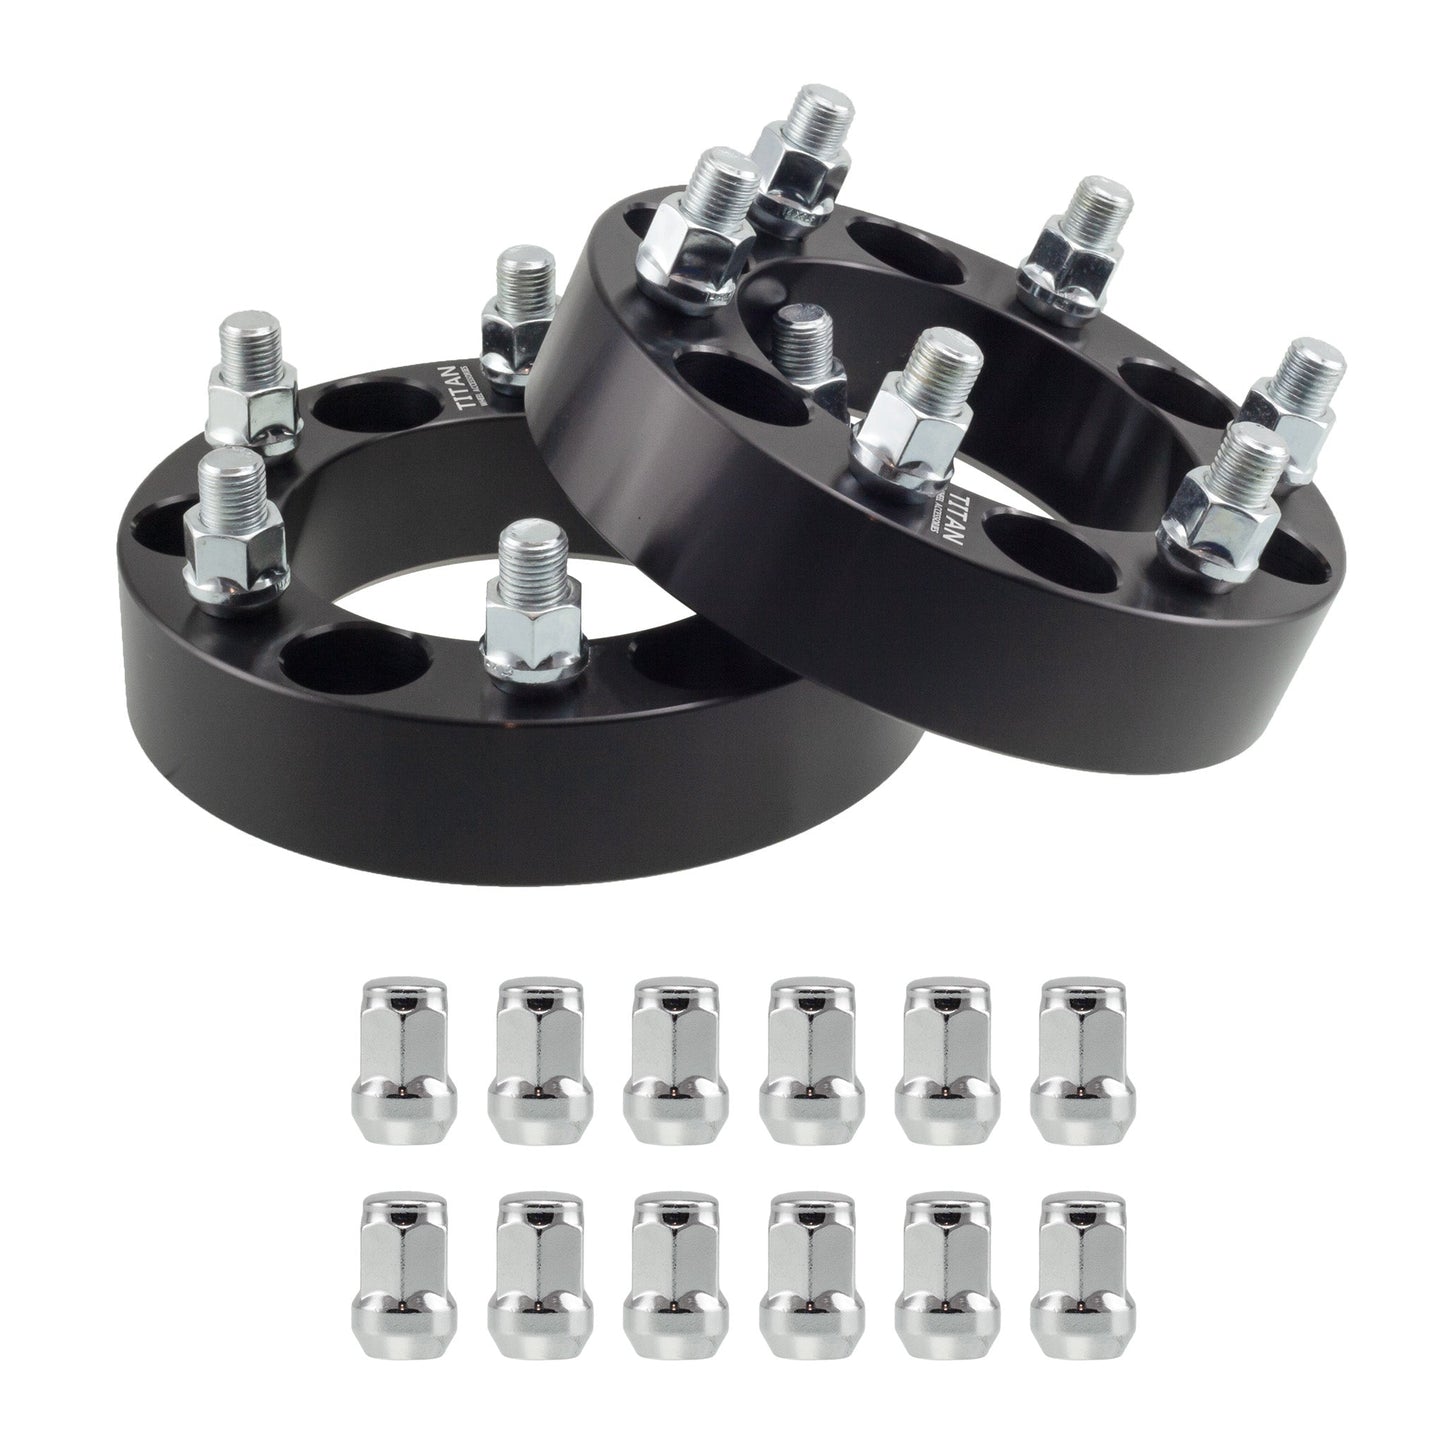 1.5" (38mm) Titan Wheel Spacers for Ford F150 Expedition Lincoln Navigator | 6x135 | 87.1 Hubcentric |14x2 Studs | Titan Wheel Accessories